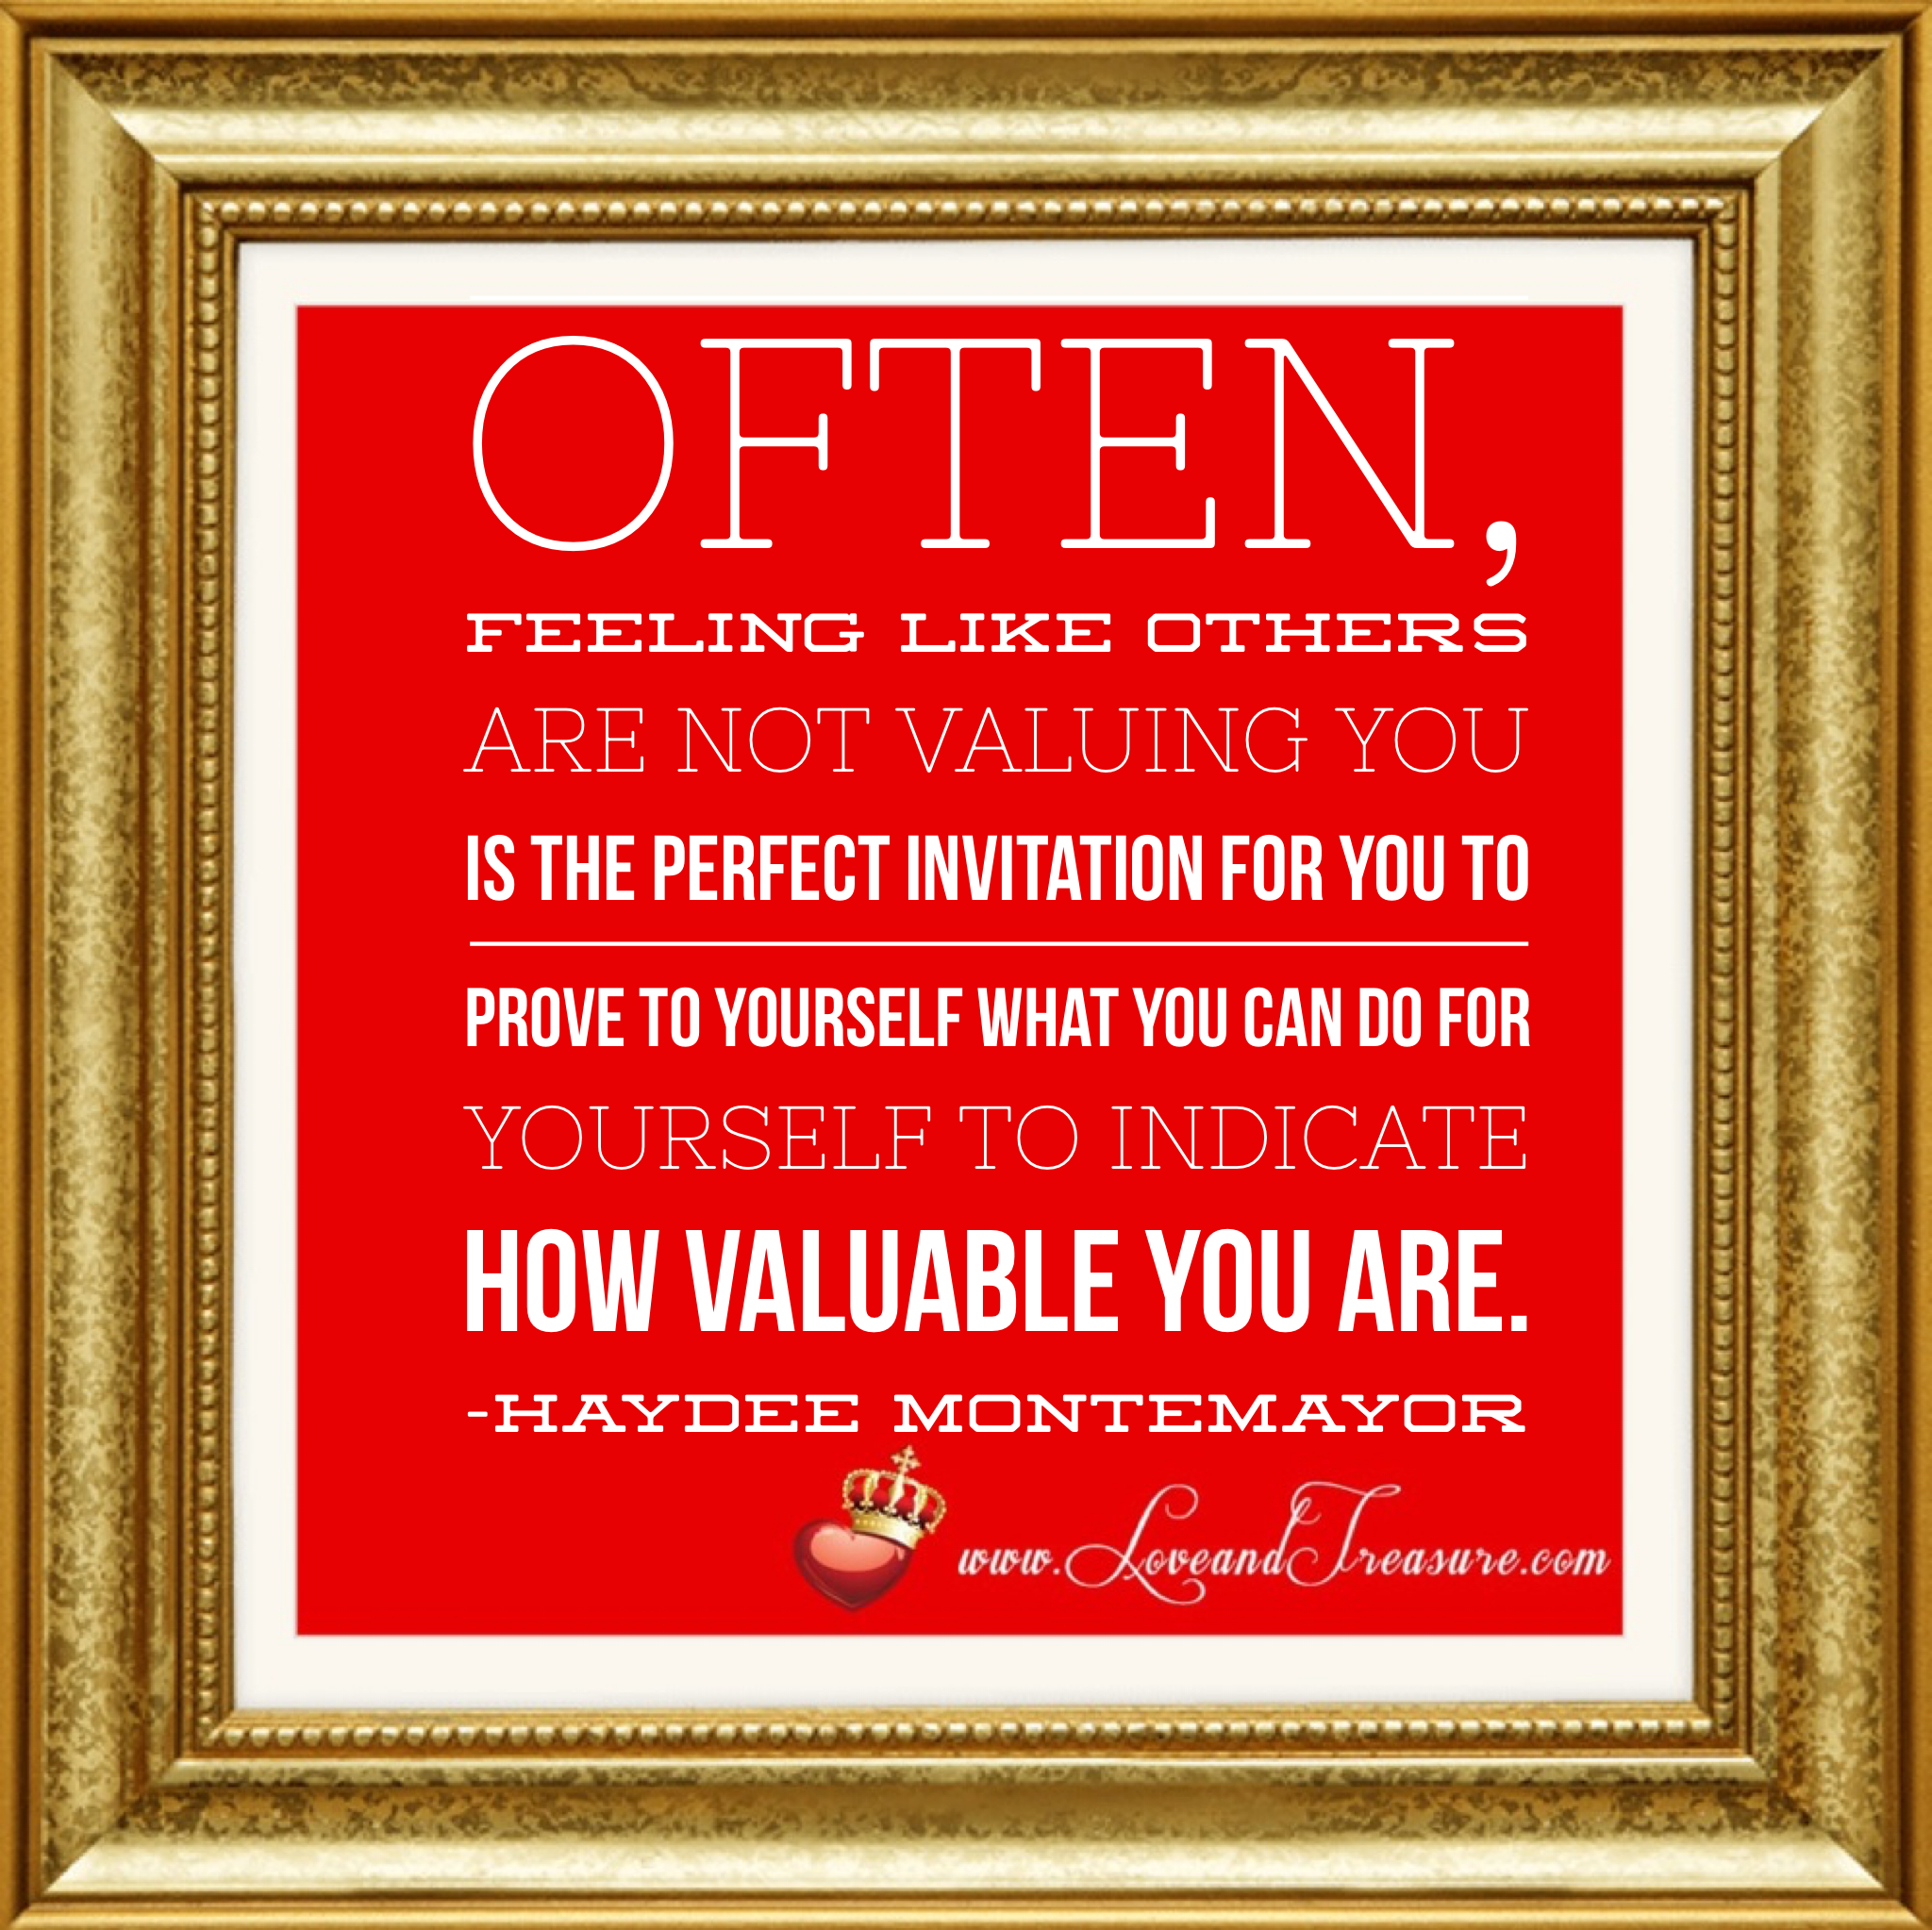 "Often, feeling like others are not valuing you is the perfect invitation for you to prove to yourself what you can do for yourself to indicate how valuable you are." quote by Haydee Montemayor from Love and Treasure Blog www.loveandtreasure.com